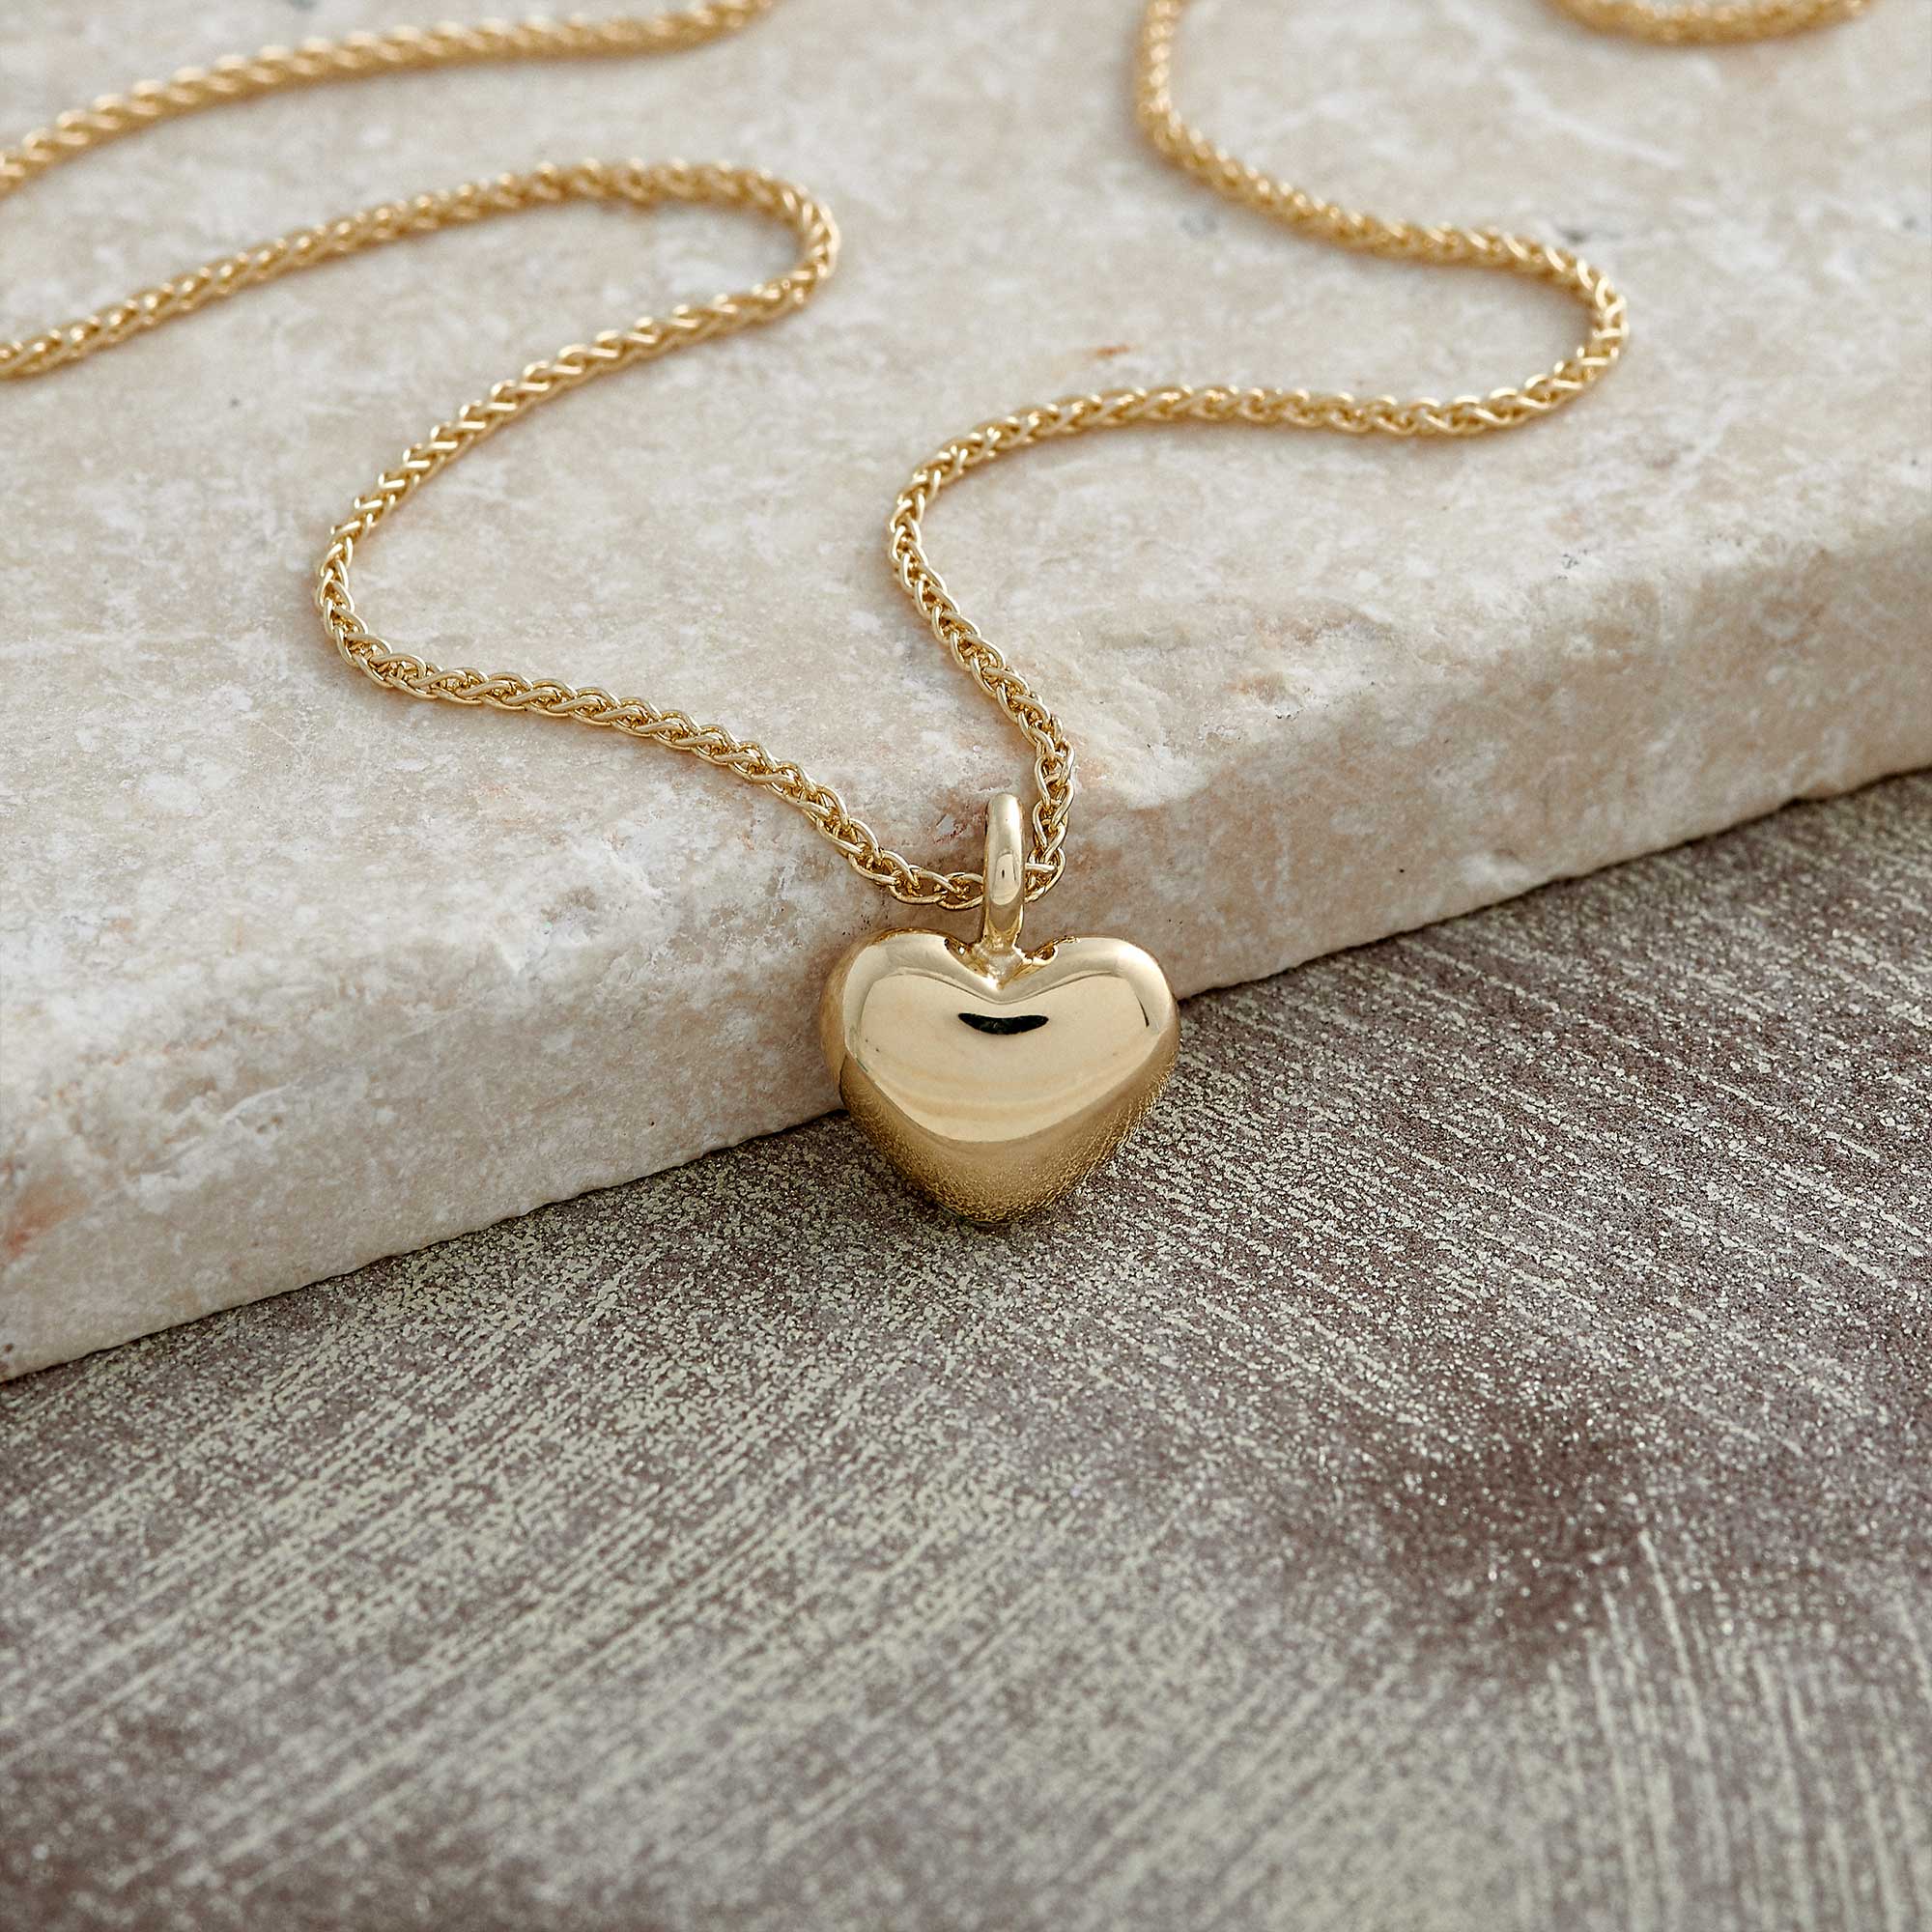 Colored Enamel Heart Chain Necklace in Gold | Uncommon James